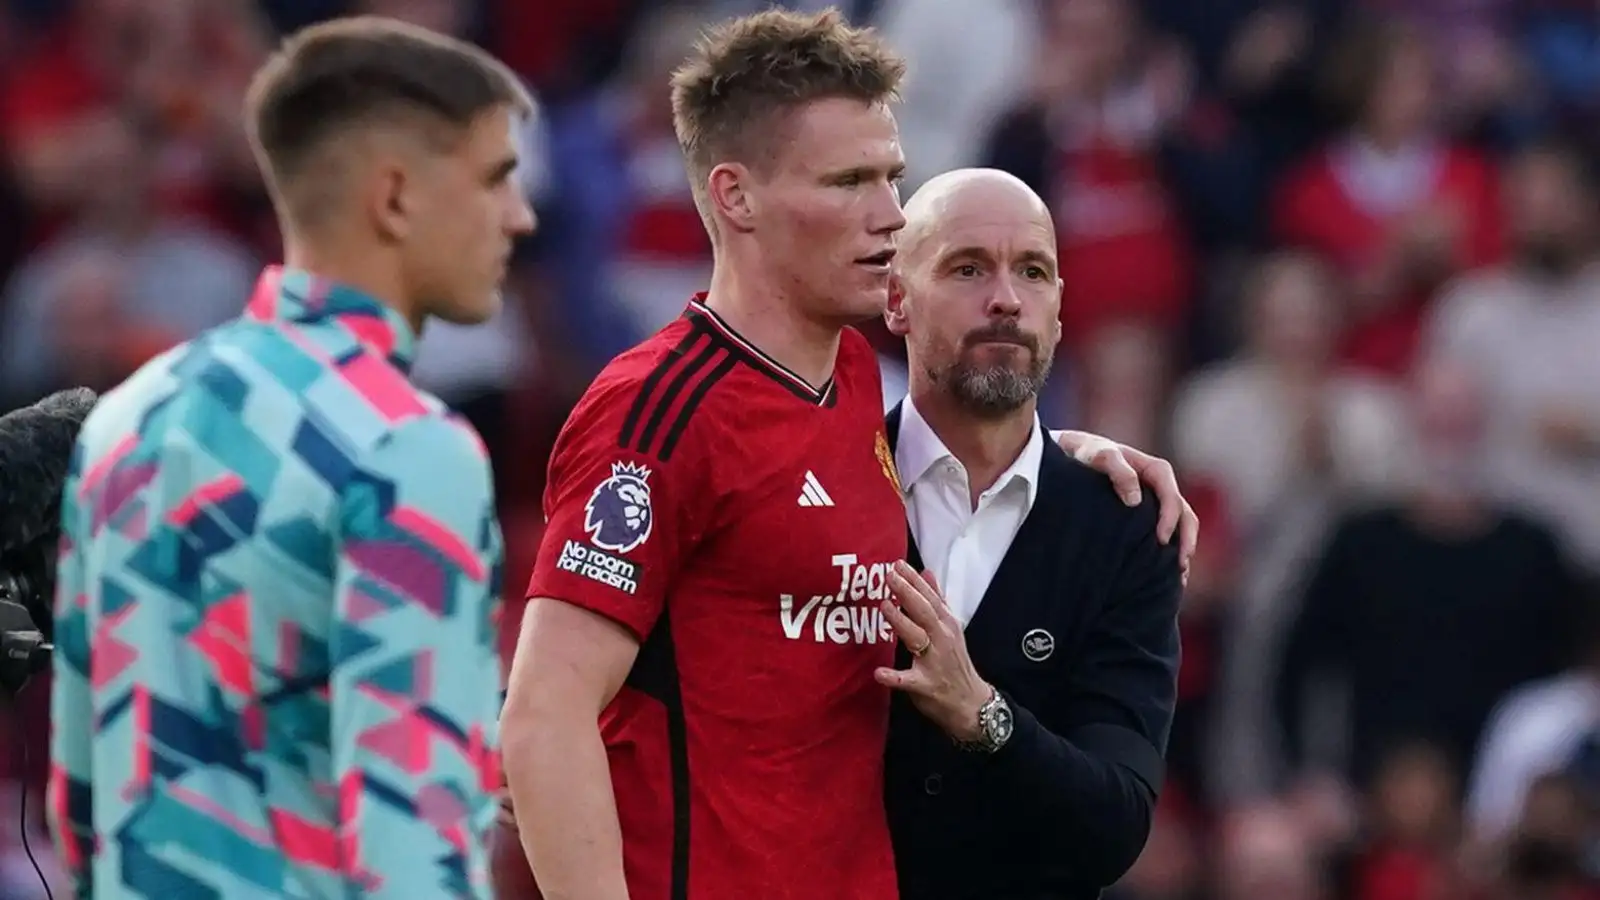 Manchester Joined boss Erik ten Hag using Scott McTominay after a dramatic win over Brentford.